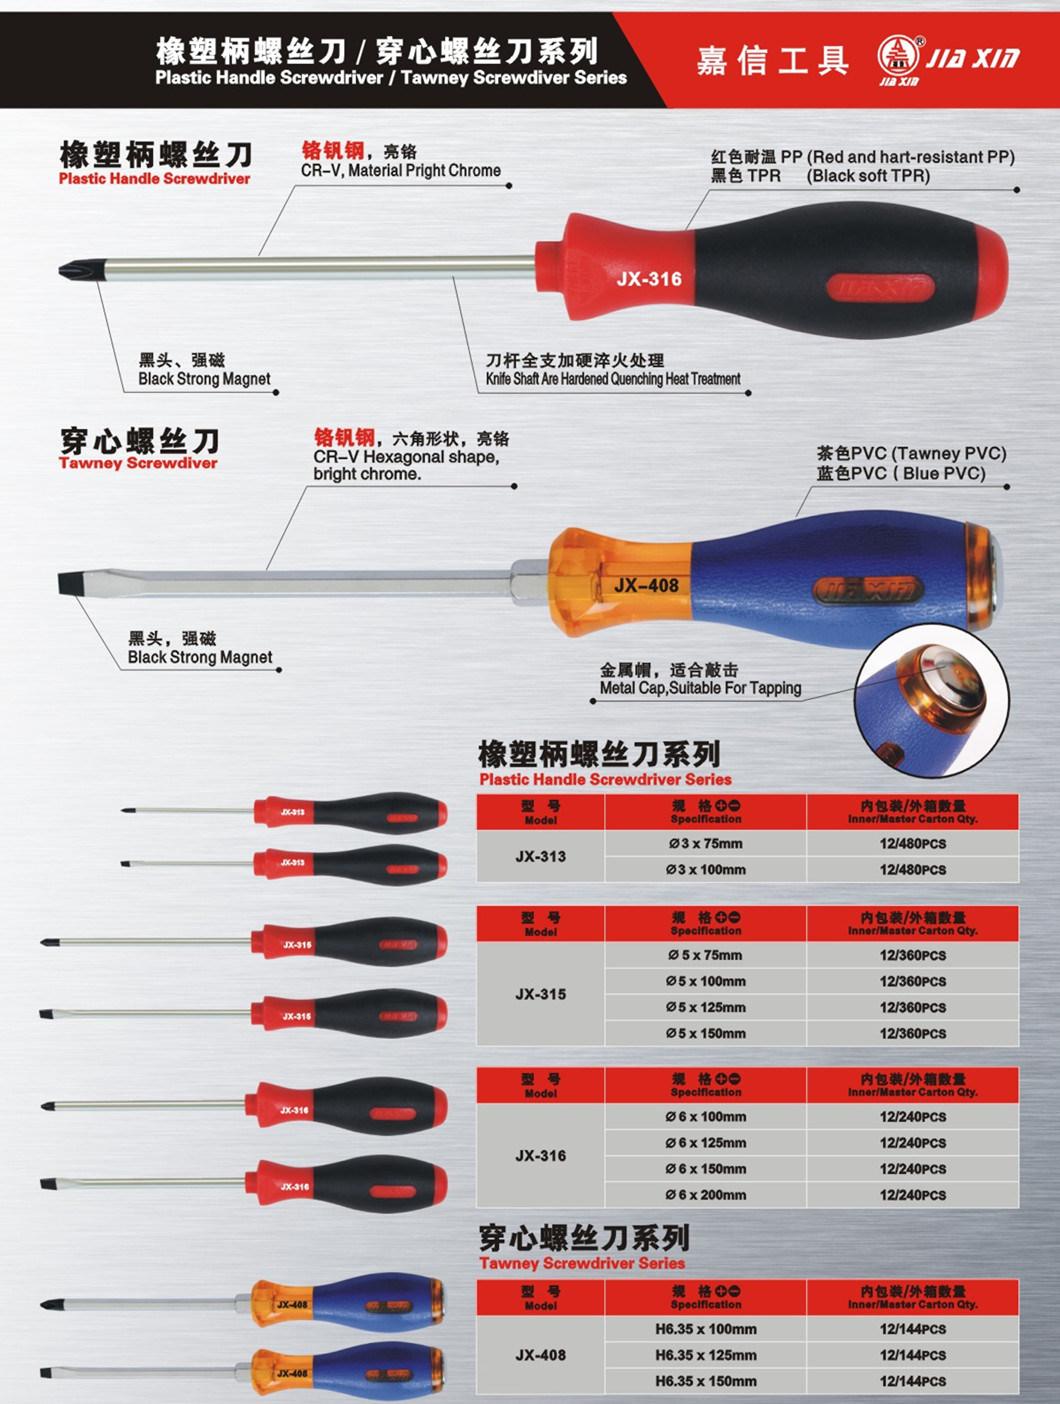 to Produce Screwdrivers of Good Quality According to Specifications